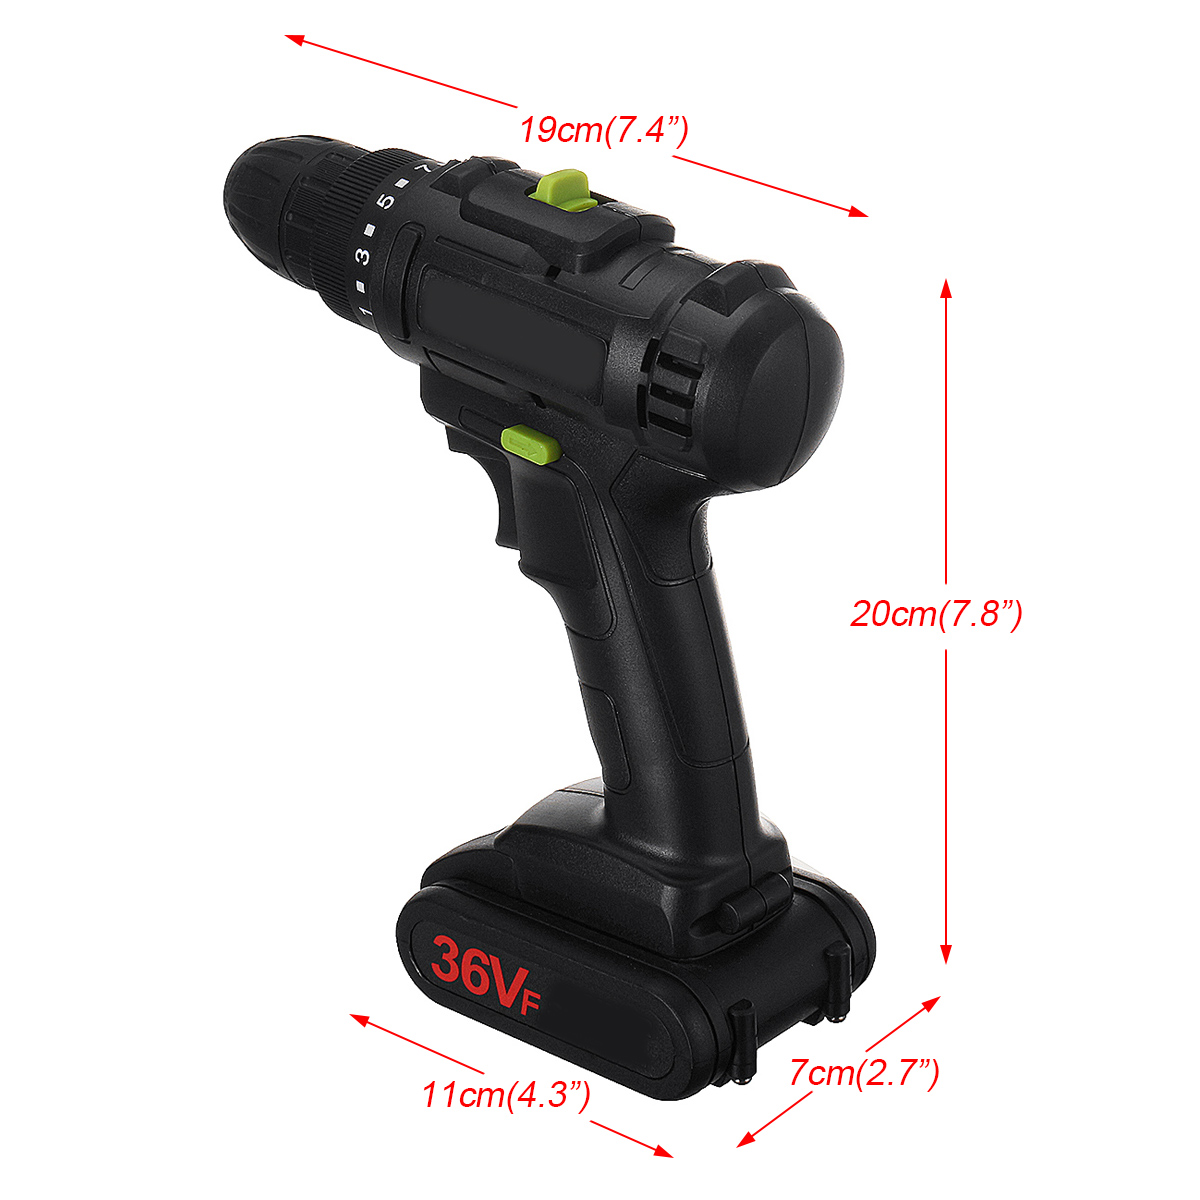 21V-1500mAH-LED-Light-Electric-Drill-Driver-Cordless-Rechargeable-Hand-Drills-2-Speed-Home-DIY-1574103-4